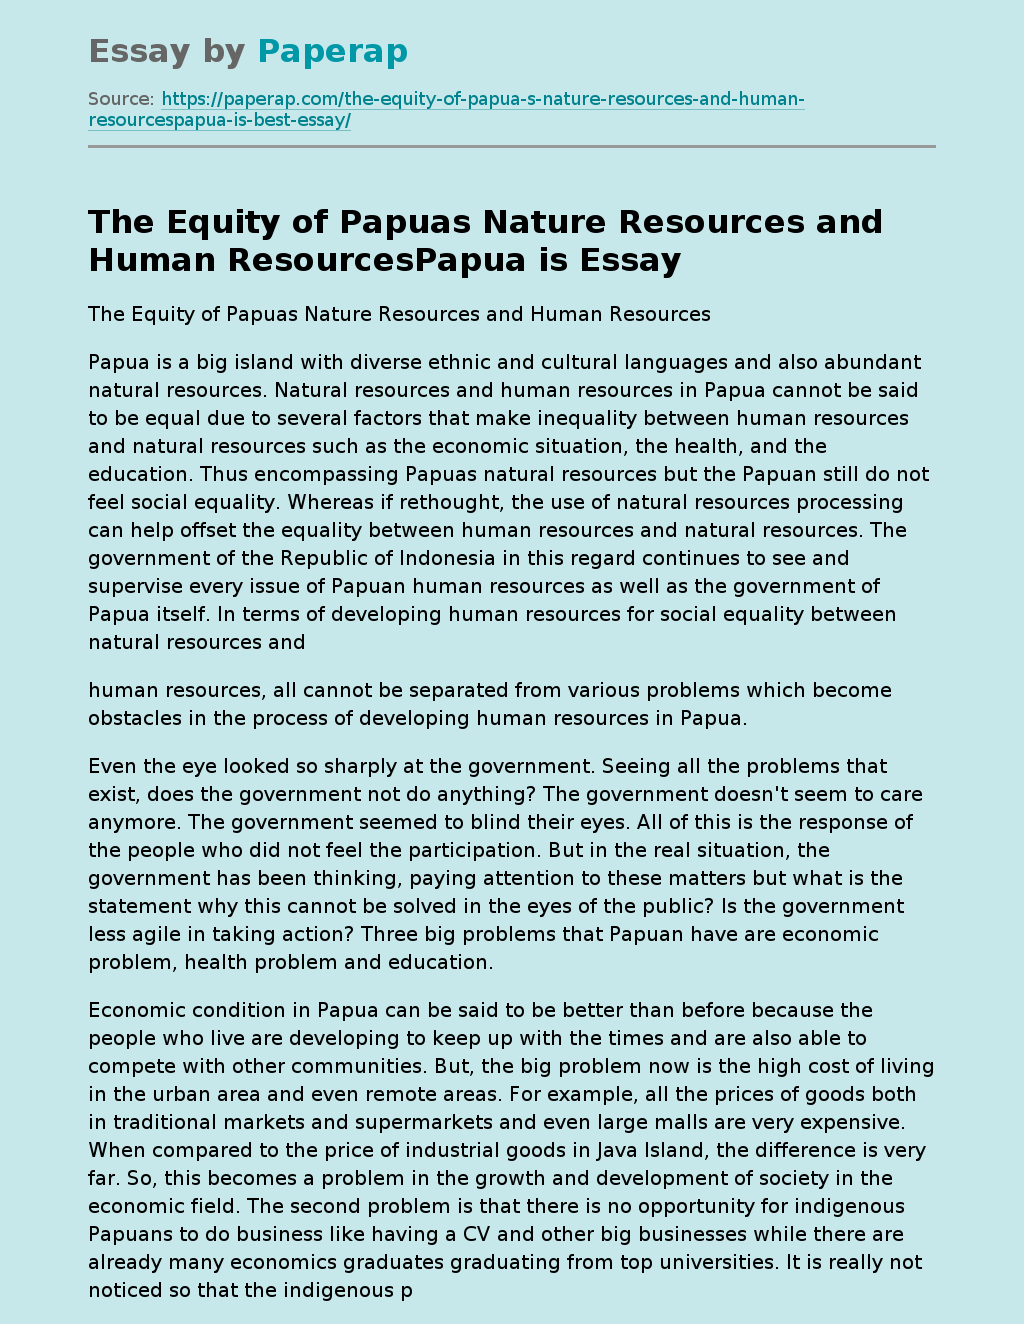 The Equity of Papuas Nature Resources and Human ResourcesPapua is